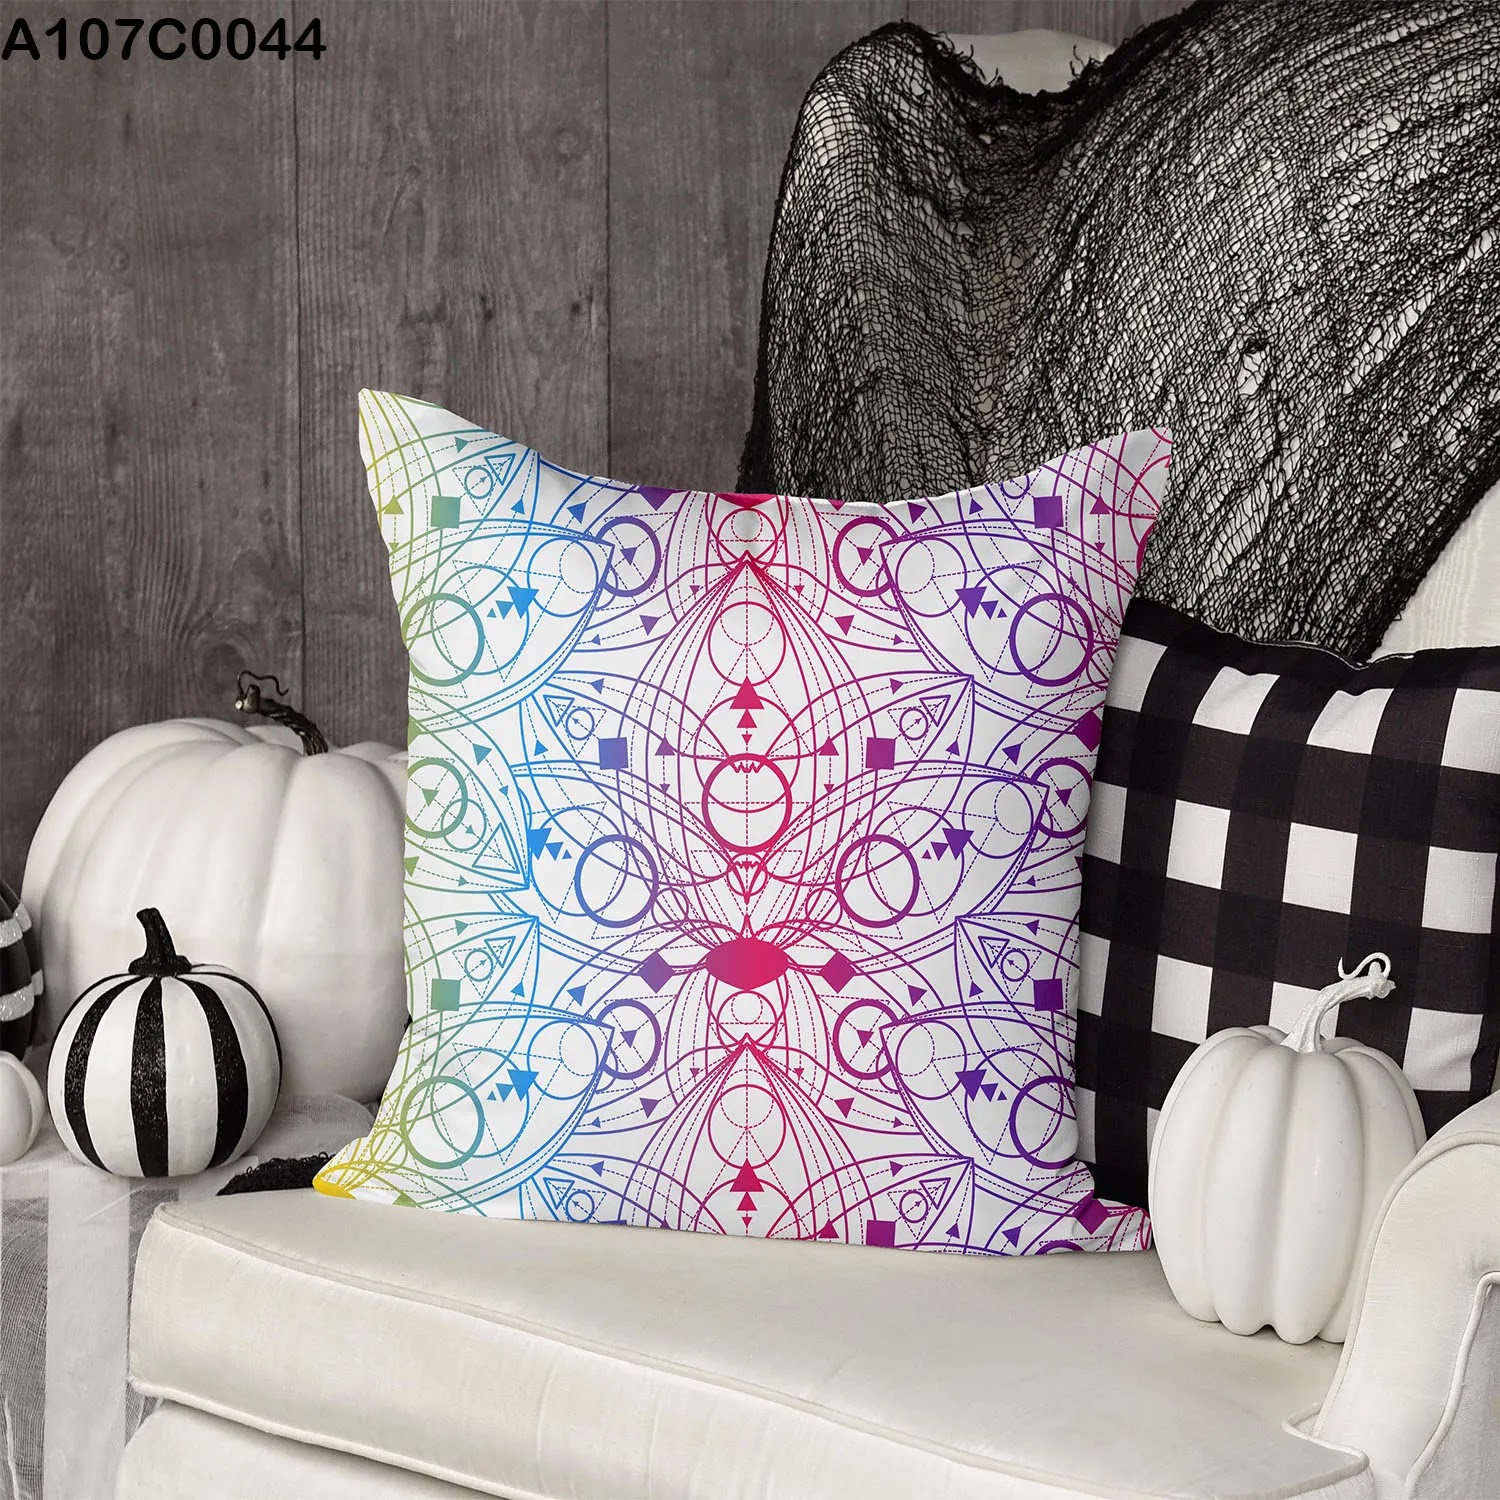 White pillow case with colored drawing shapes